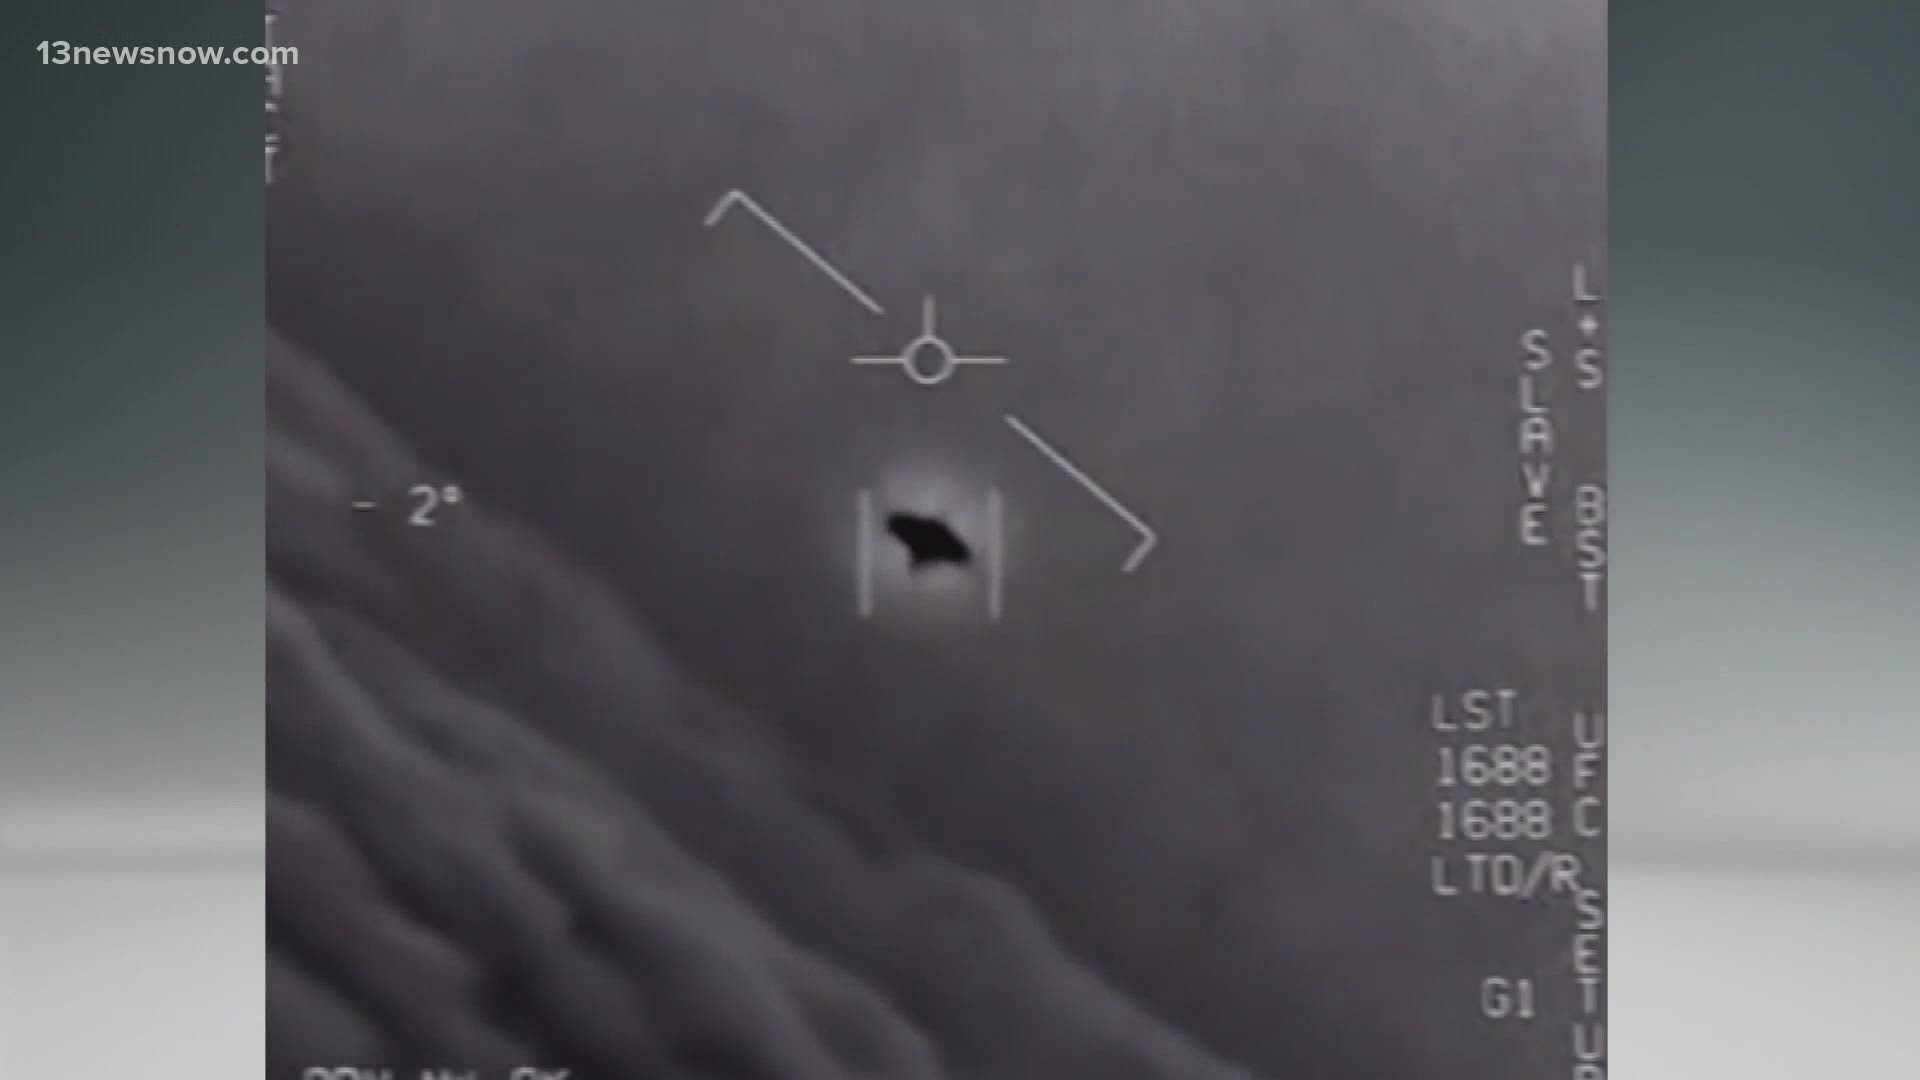 The Department of Defense is forming a new task force to investigate UFOs observed by American military aircraft.